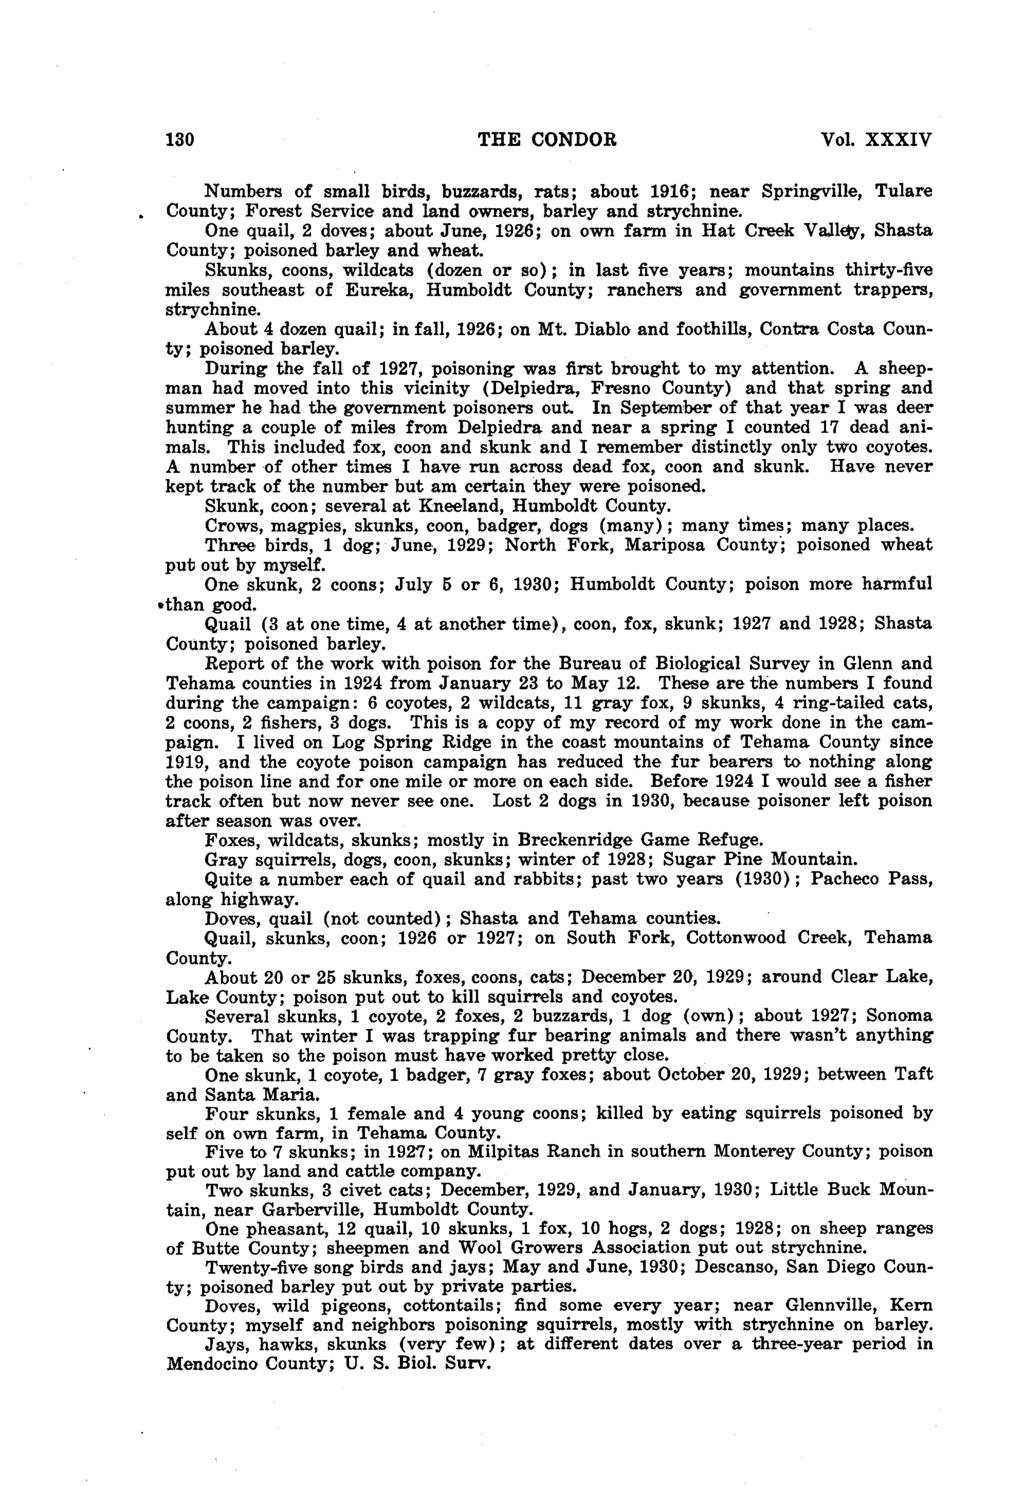 130 THE CONDOR Vol. XXXIV Numbers of small birds, buzzards, rats; about 1916; near Springville, Tulare County; Forest Service and land owners, barley and strychnine.